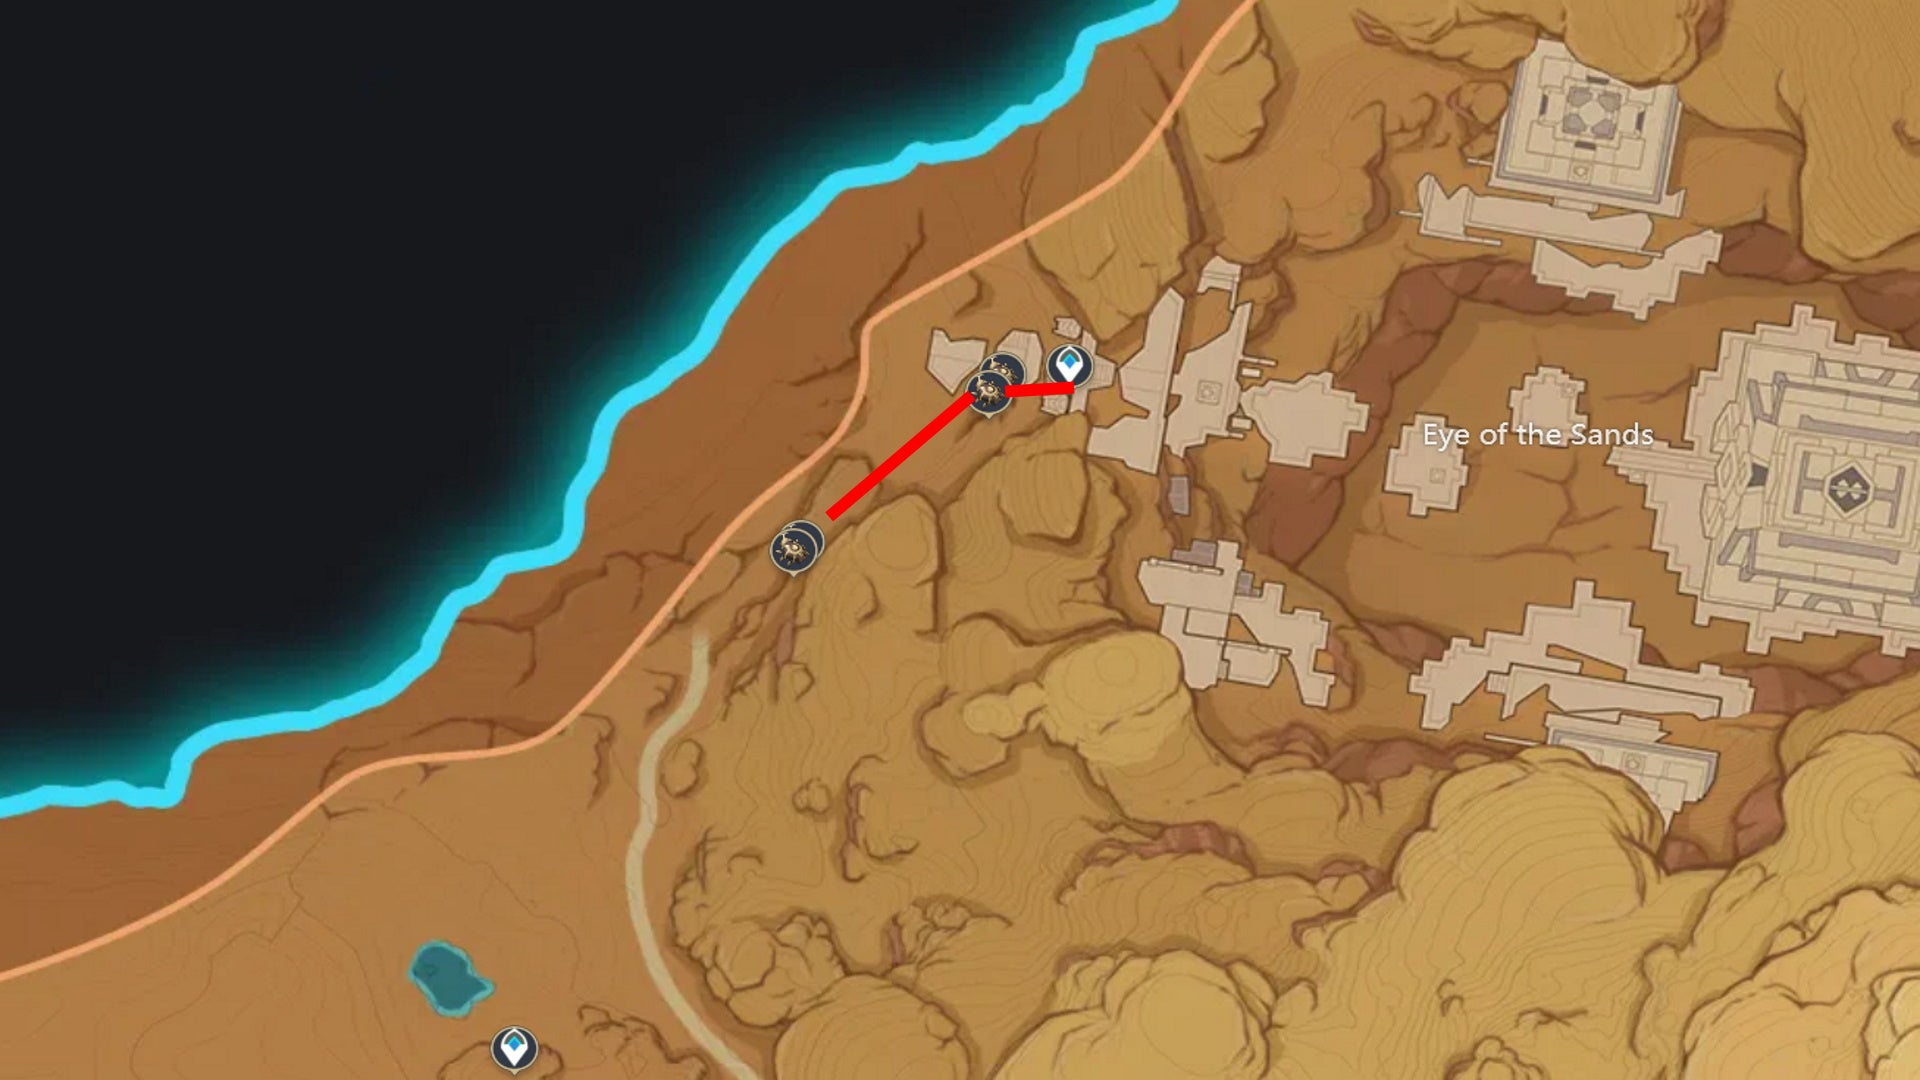 Genshin Impact Scarab locations: A map showing scarab farm routes near Eye of the Sands